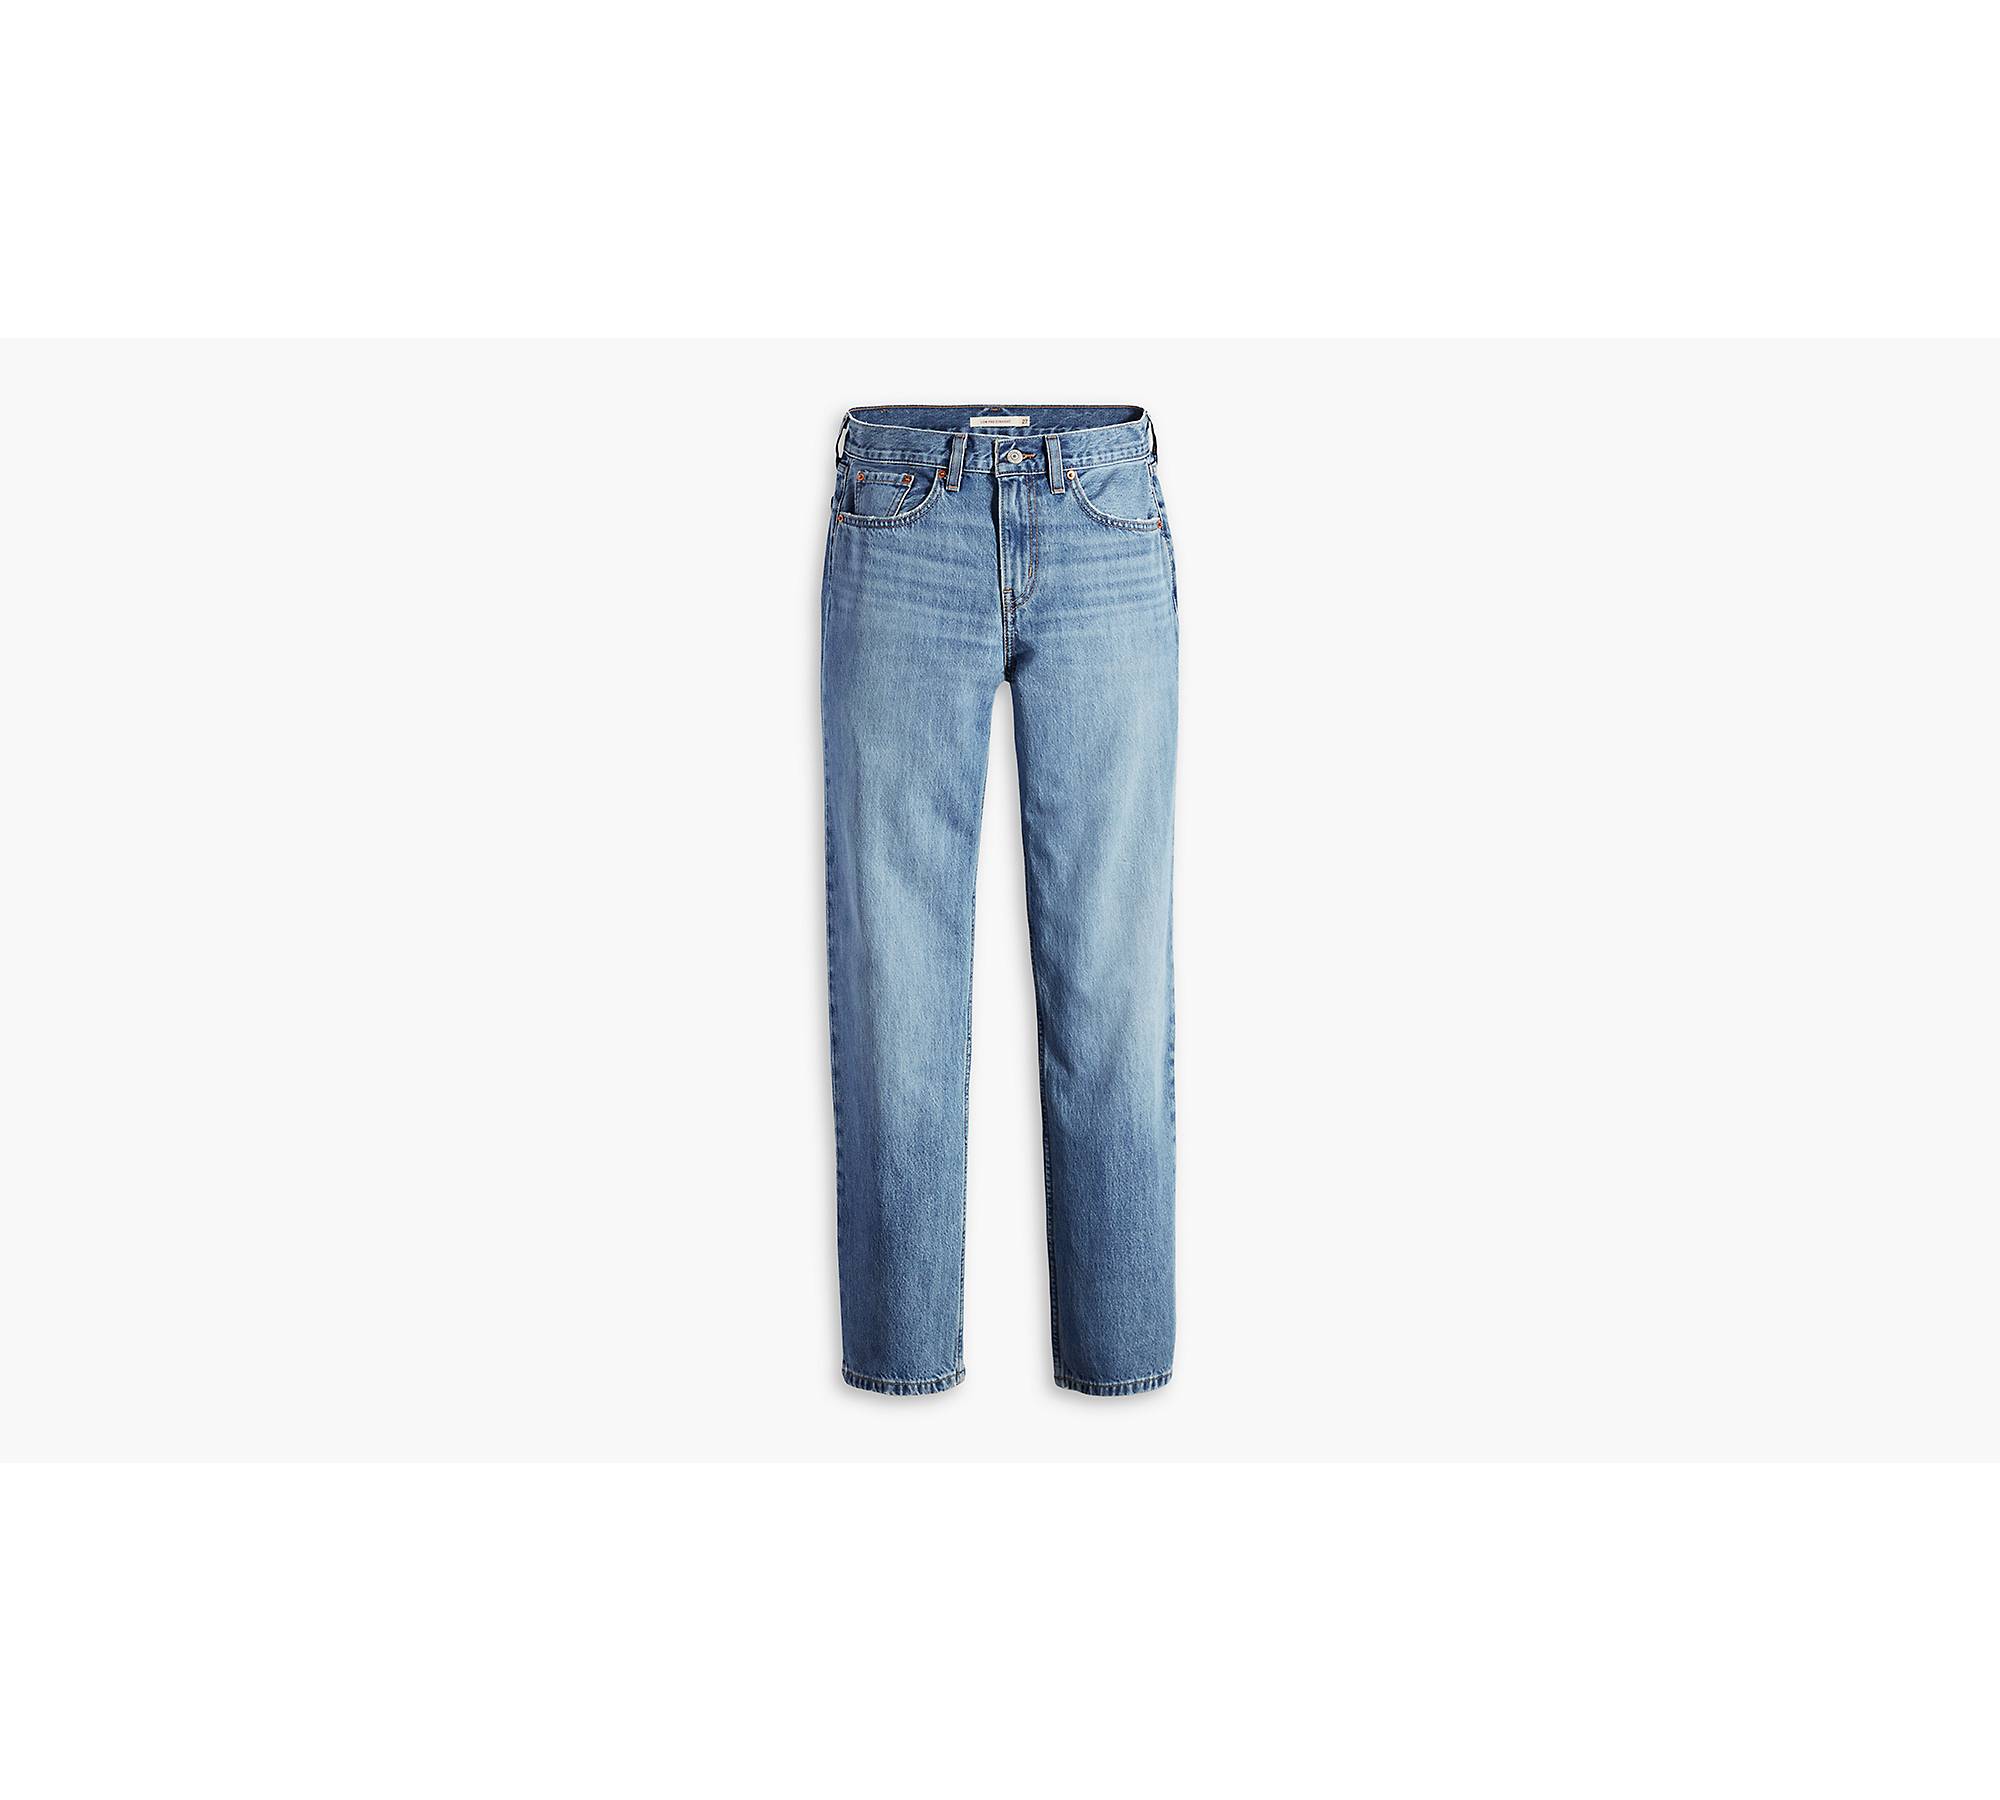 Jeans Levis Mujer Importados